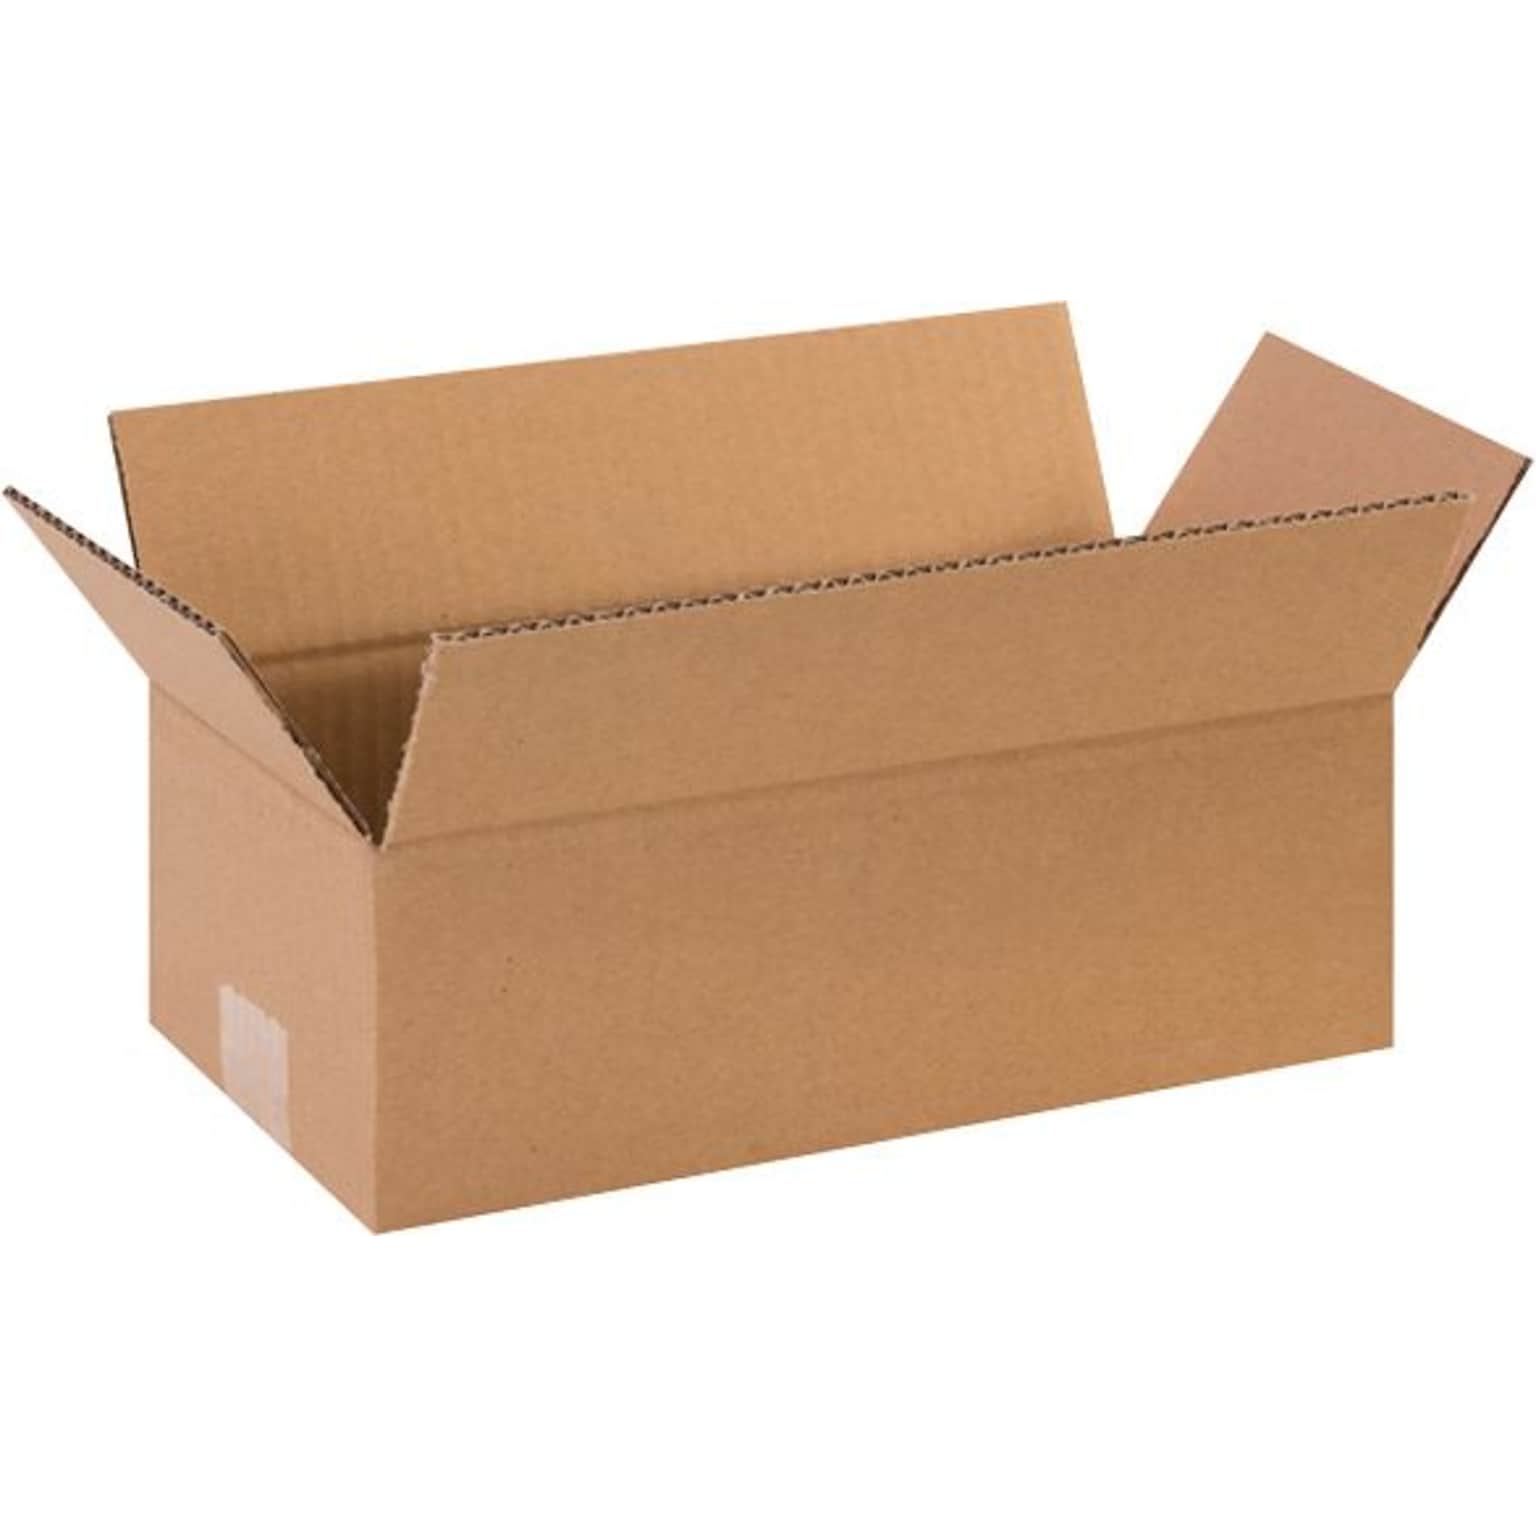 Quill Brand® Brand® 12 x 6 x 5 Shipping Boxes, 32 ECT, Brown, 25/Bundle (1265)